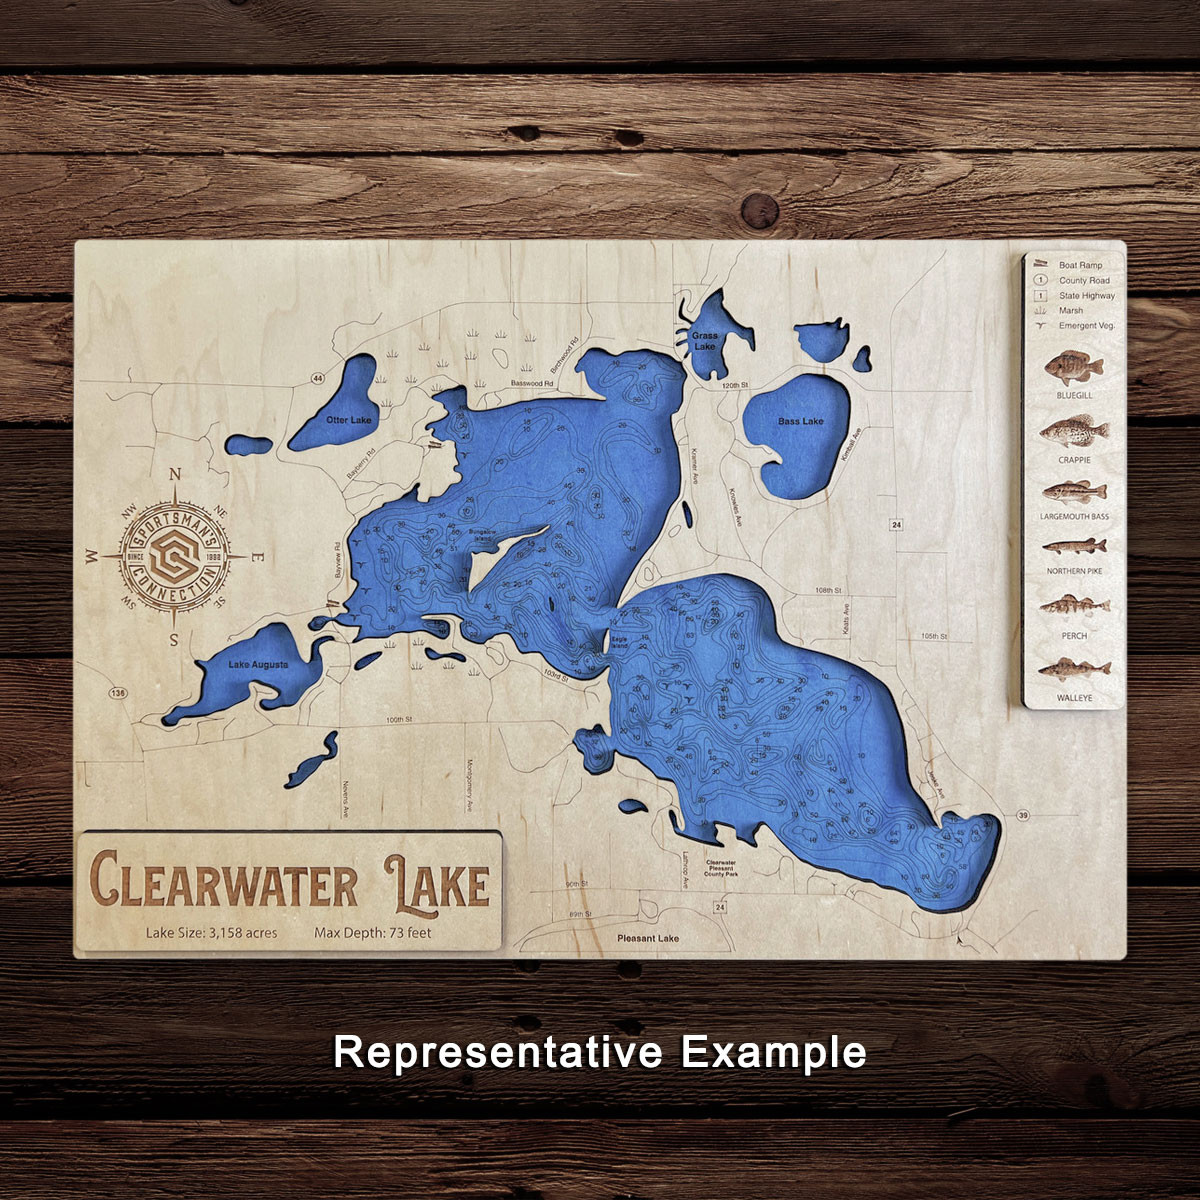 https://cdn10.bigcommerce.com/s-hdumb/products/20181/images/271459/Wood-Engraved-Map-Minnesota-Example-Front__35242.1682097528.1280.1280.jpg?c=2